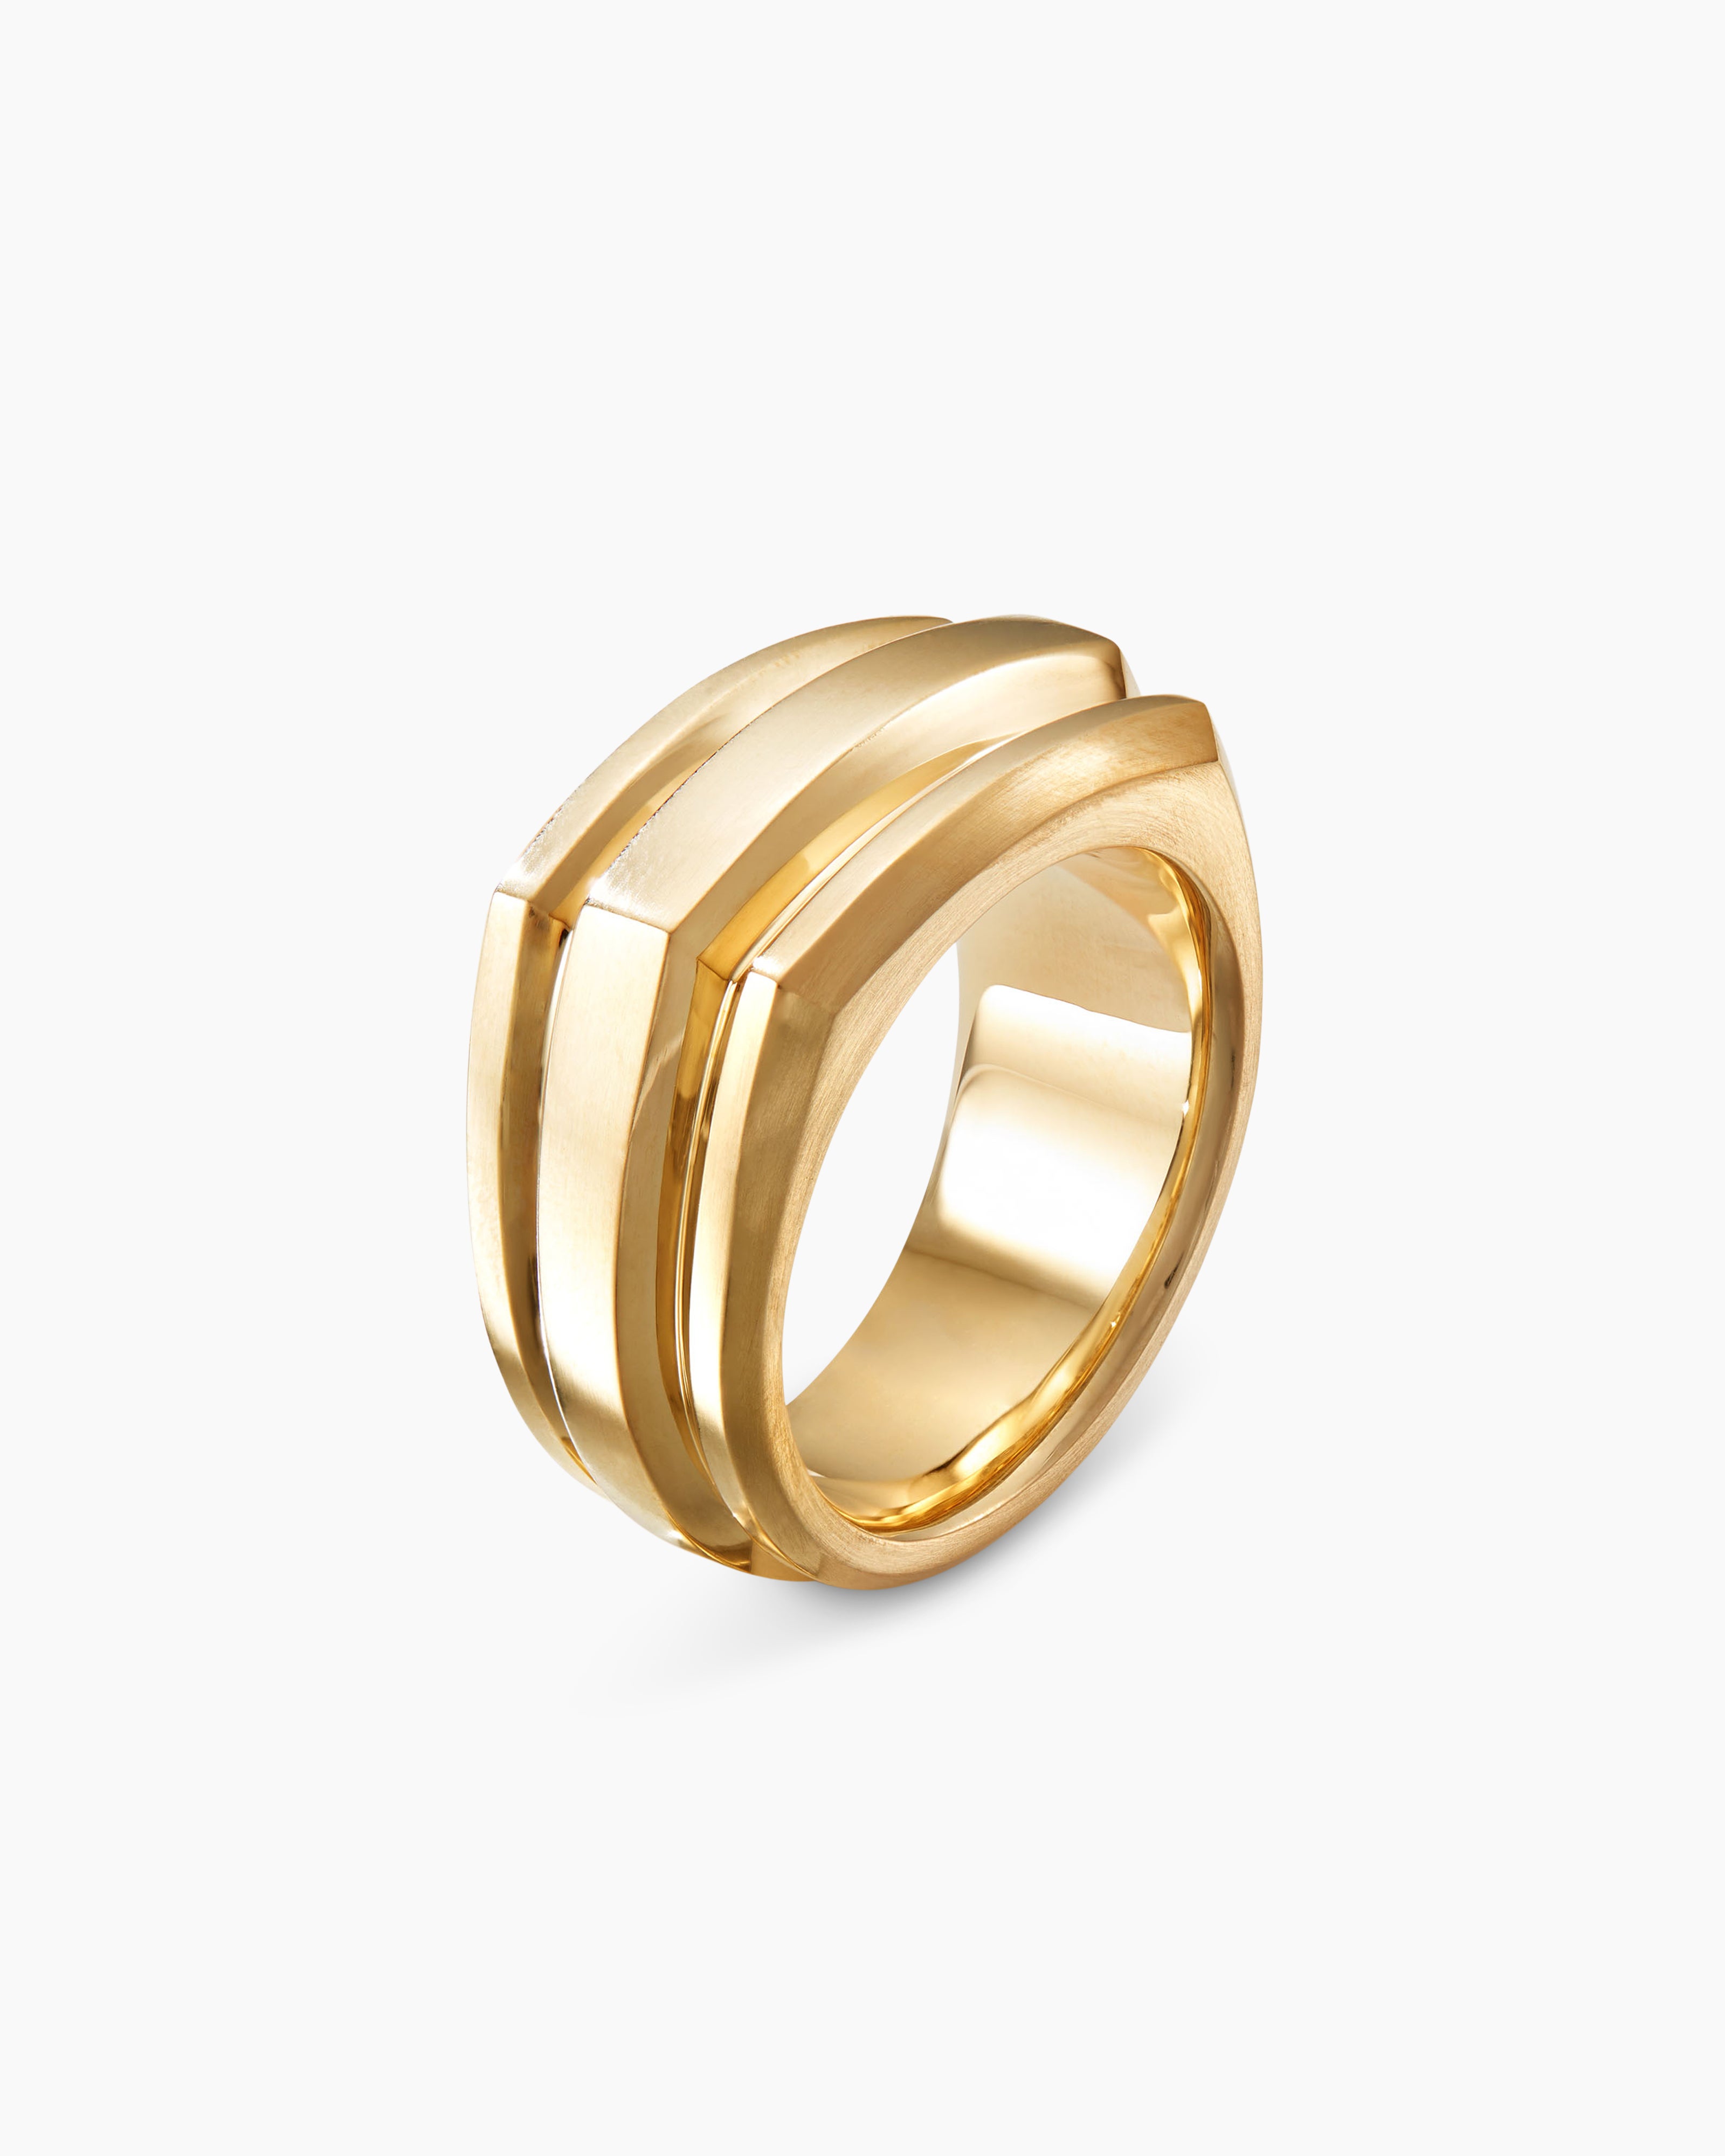 Men Gold Ring Design with Weight and Price - YouTube